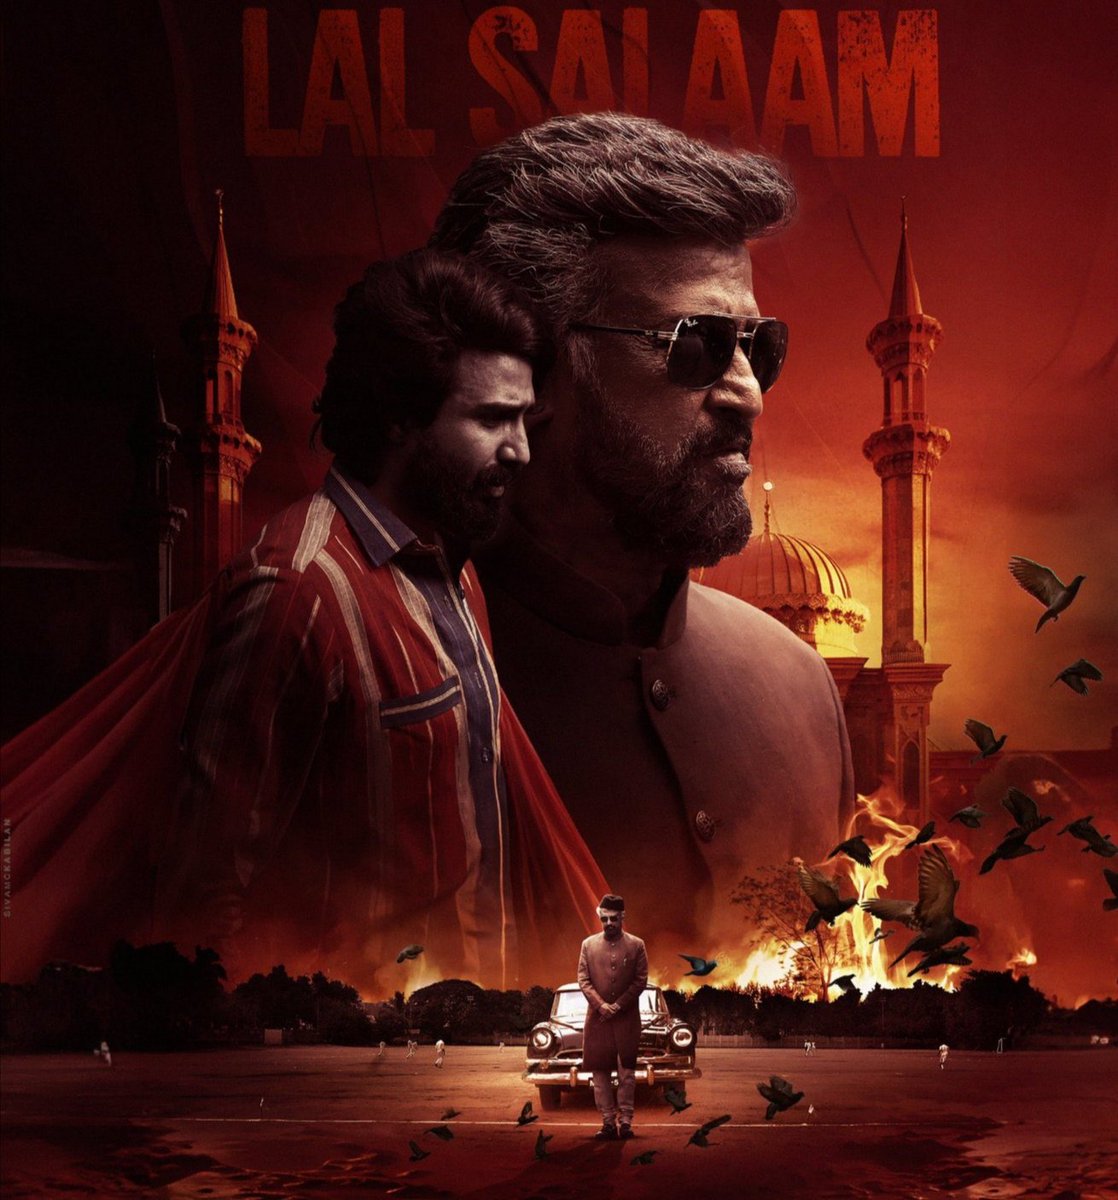 #LalSalaam Final Box Office Collection :-

Tamil Nadu : ₹18.40 Cr
Rest of India : ₹3.65 Cr
Overseas : ₹11.60 Cr / $1.40 Mn

Total Worldwide Gross : ₹33.65 Cr